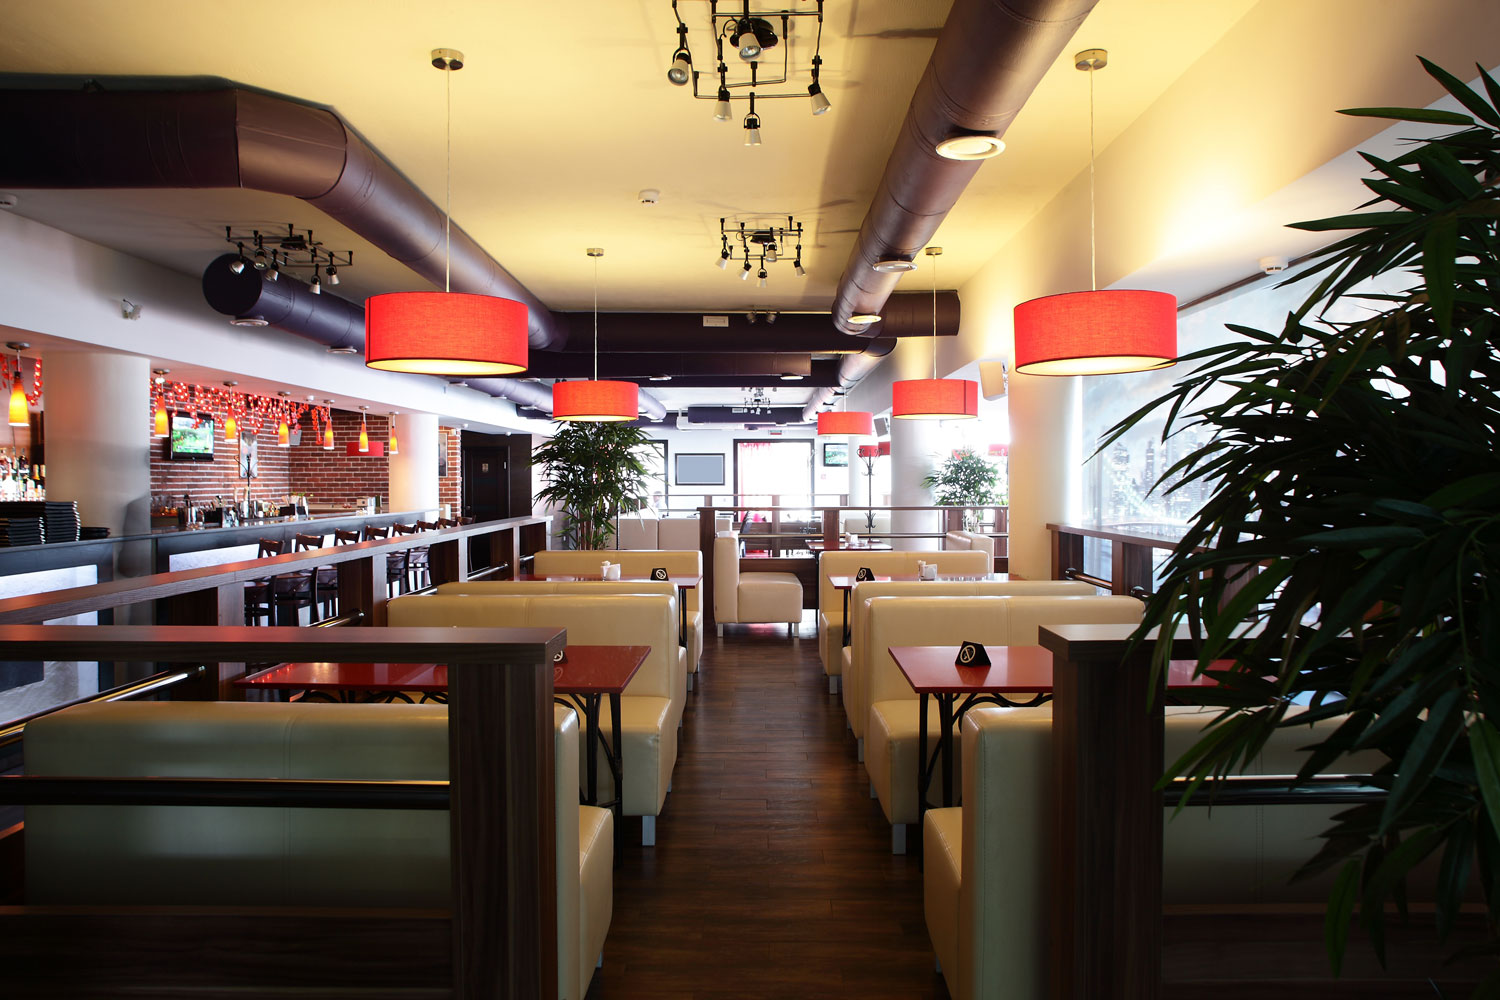 Restaurant Moving: 10 Tasks to Complete for New Restaurant, Relocation or Renovations